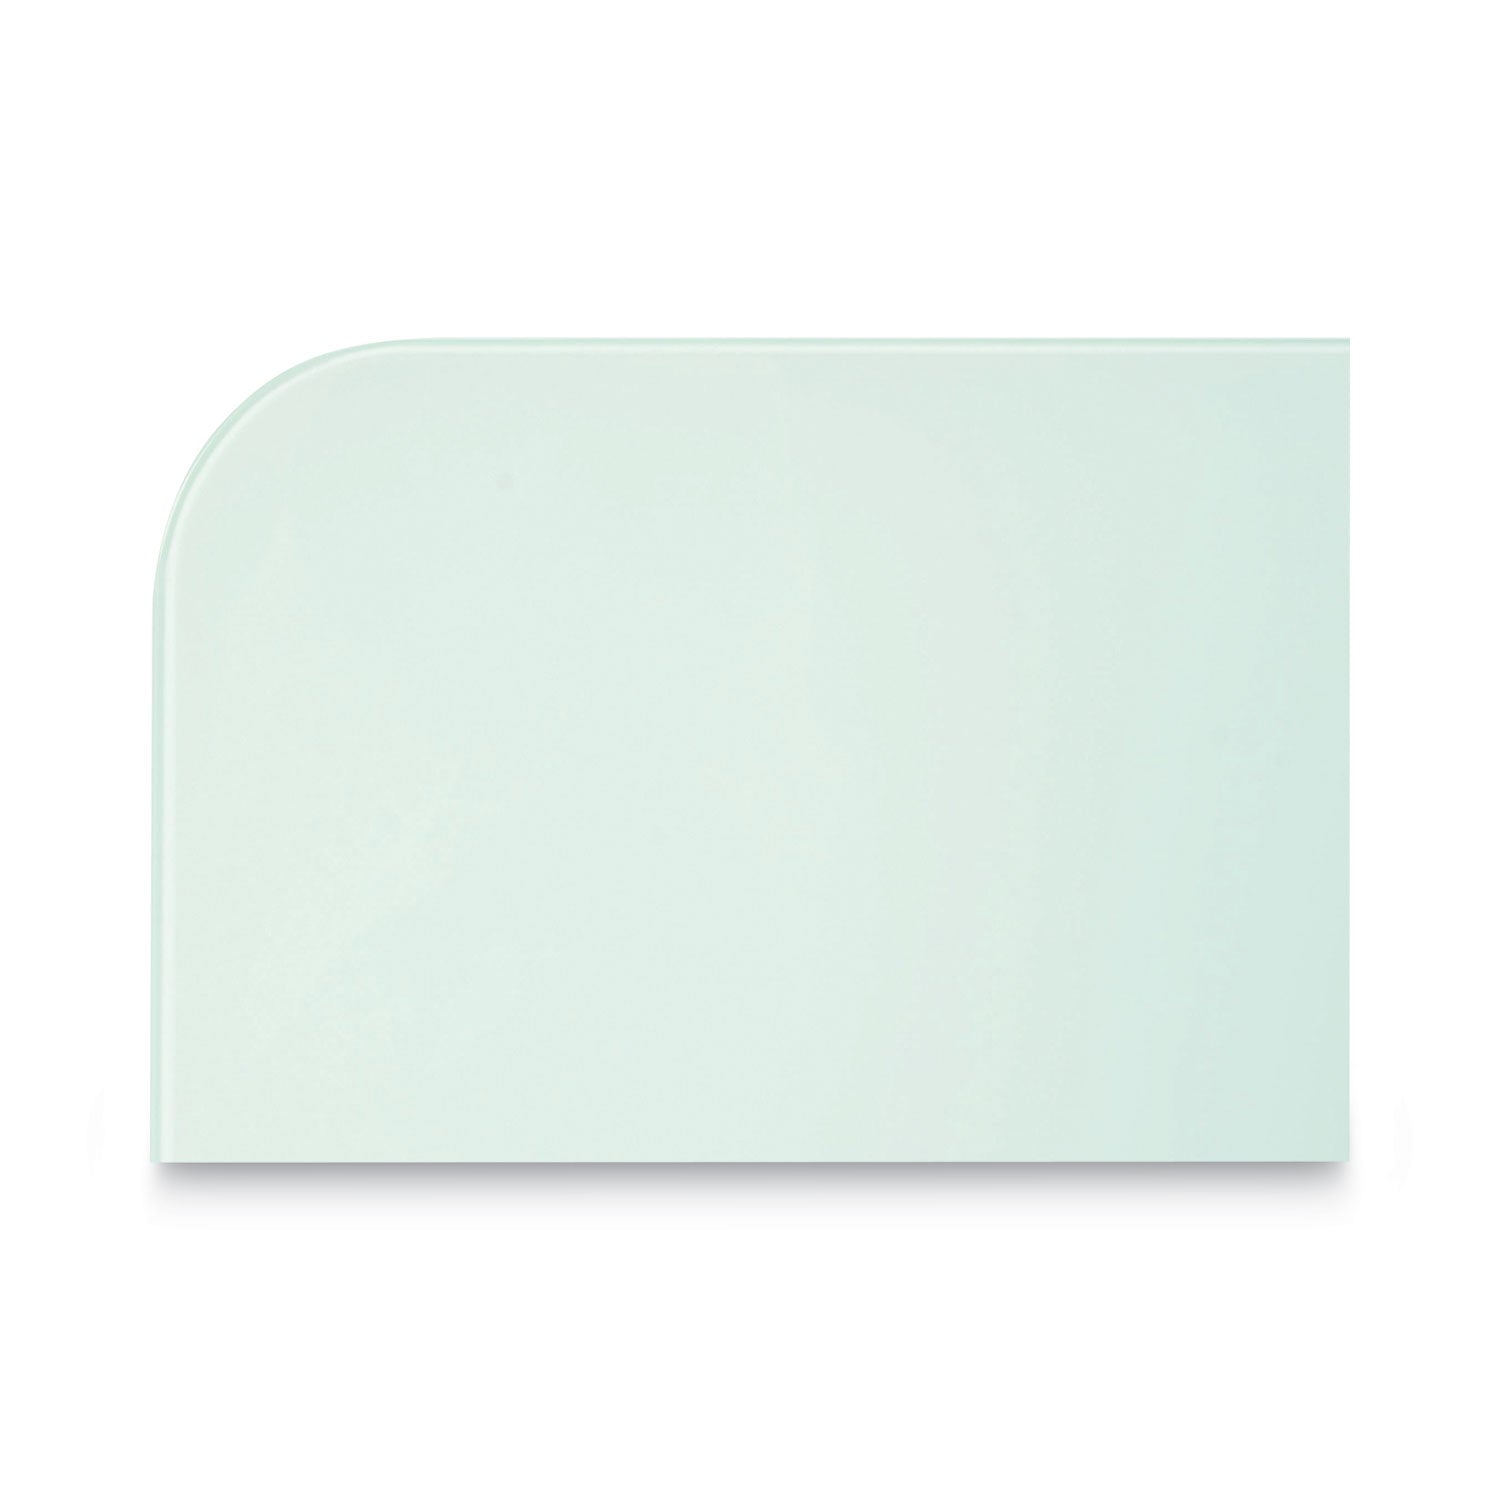 magnetic-glass-dry-erase-board-60-x-48-opaque-white-surface_bvcgl110101 - 7